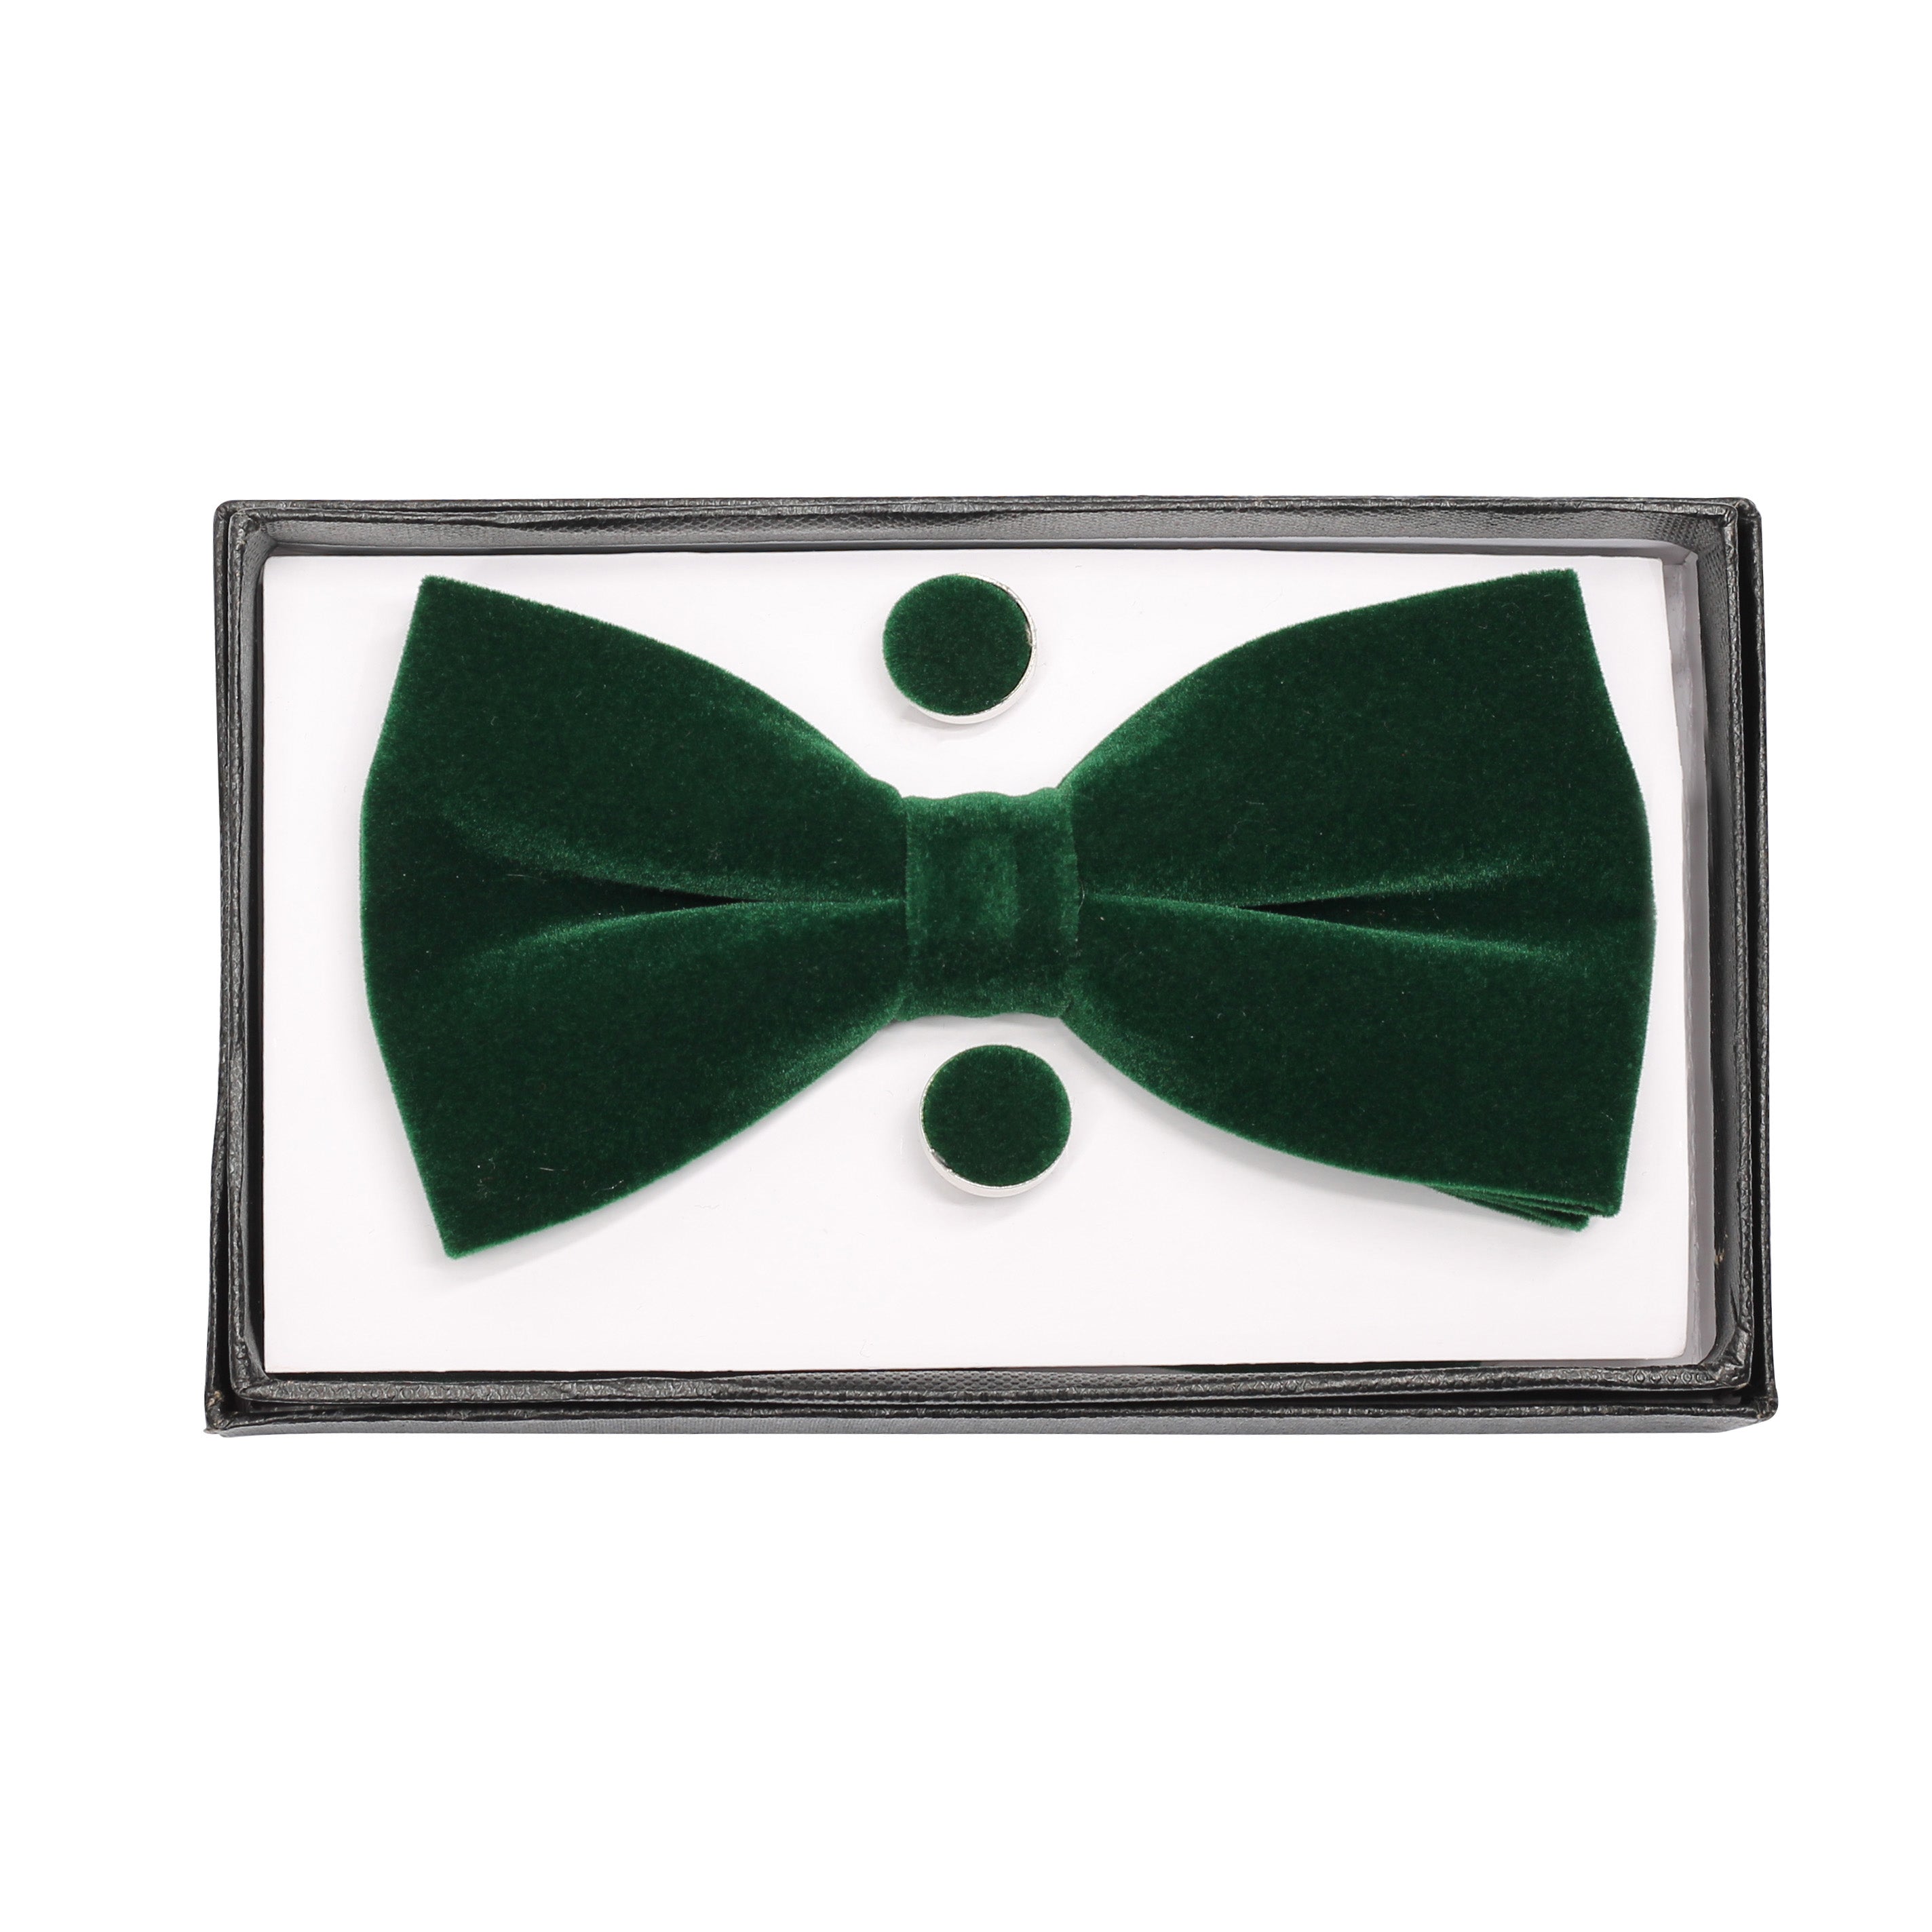 Green Velvet Bow Tie with Cufflink & Pocket Square